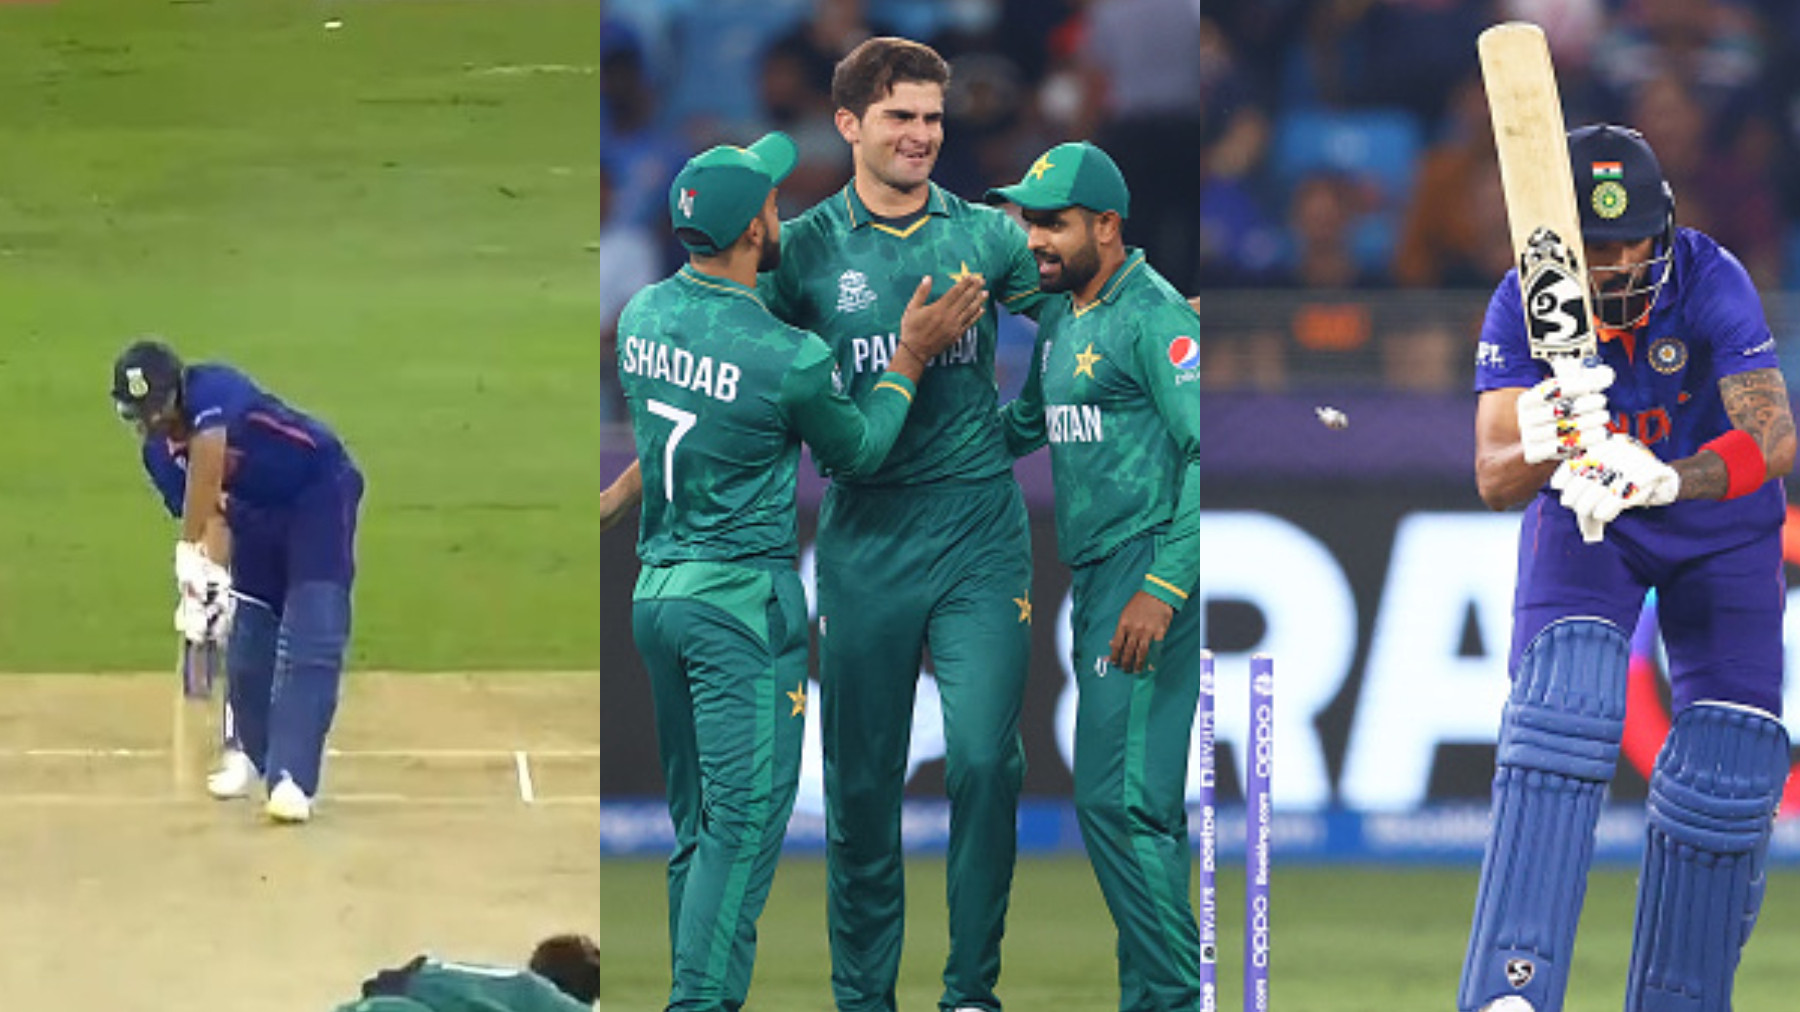 T20 World Cup 2021: WATCH- Shaheen Afridi gives India a heartache by removing Rohit-Rahul for cheap